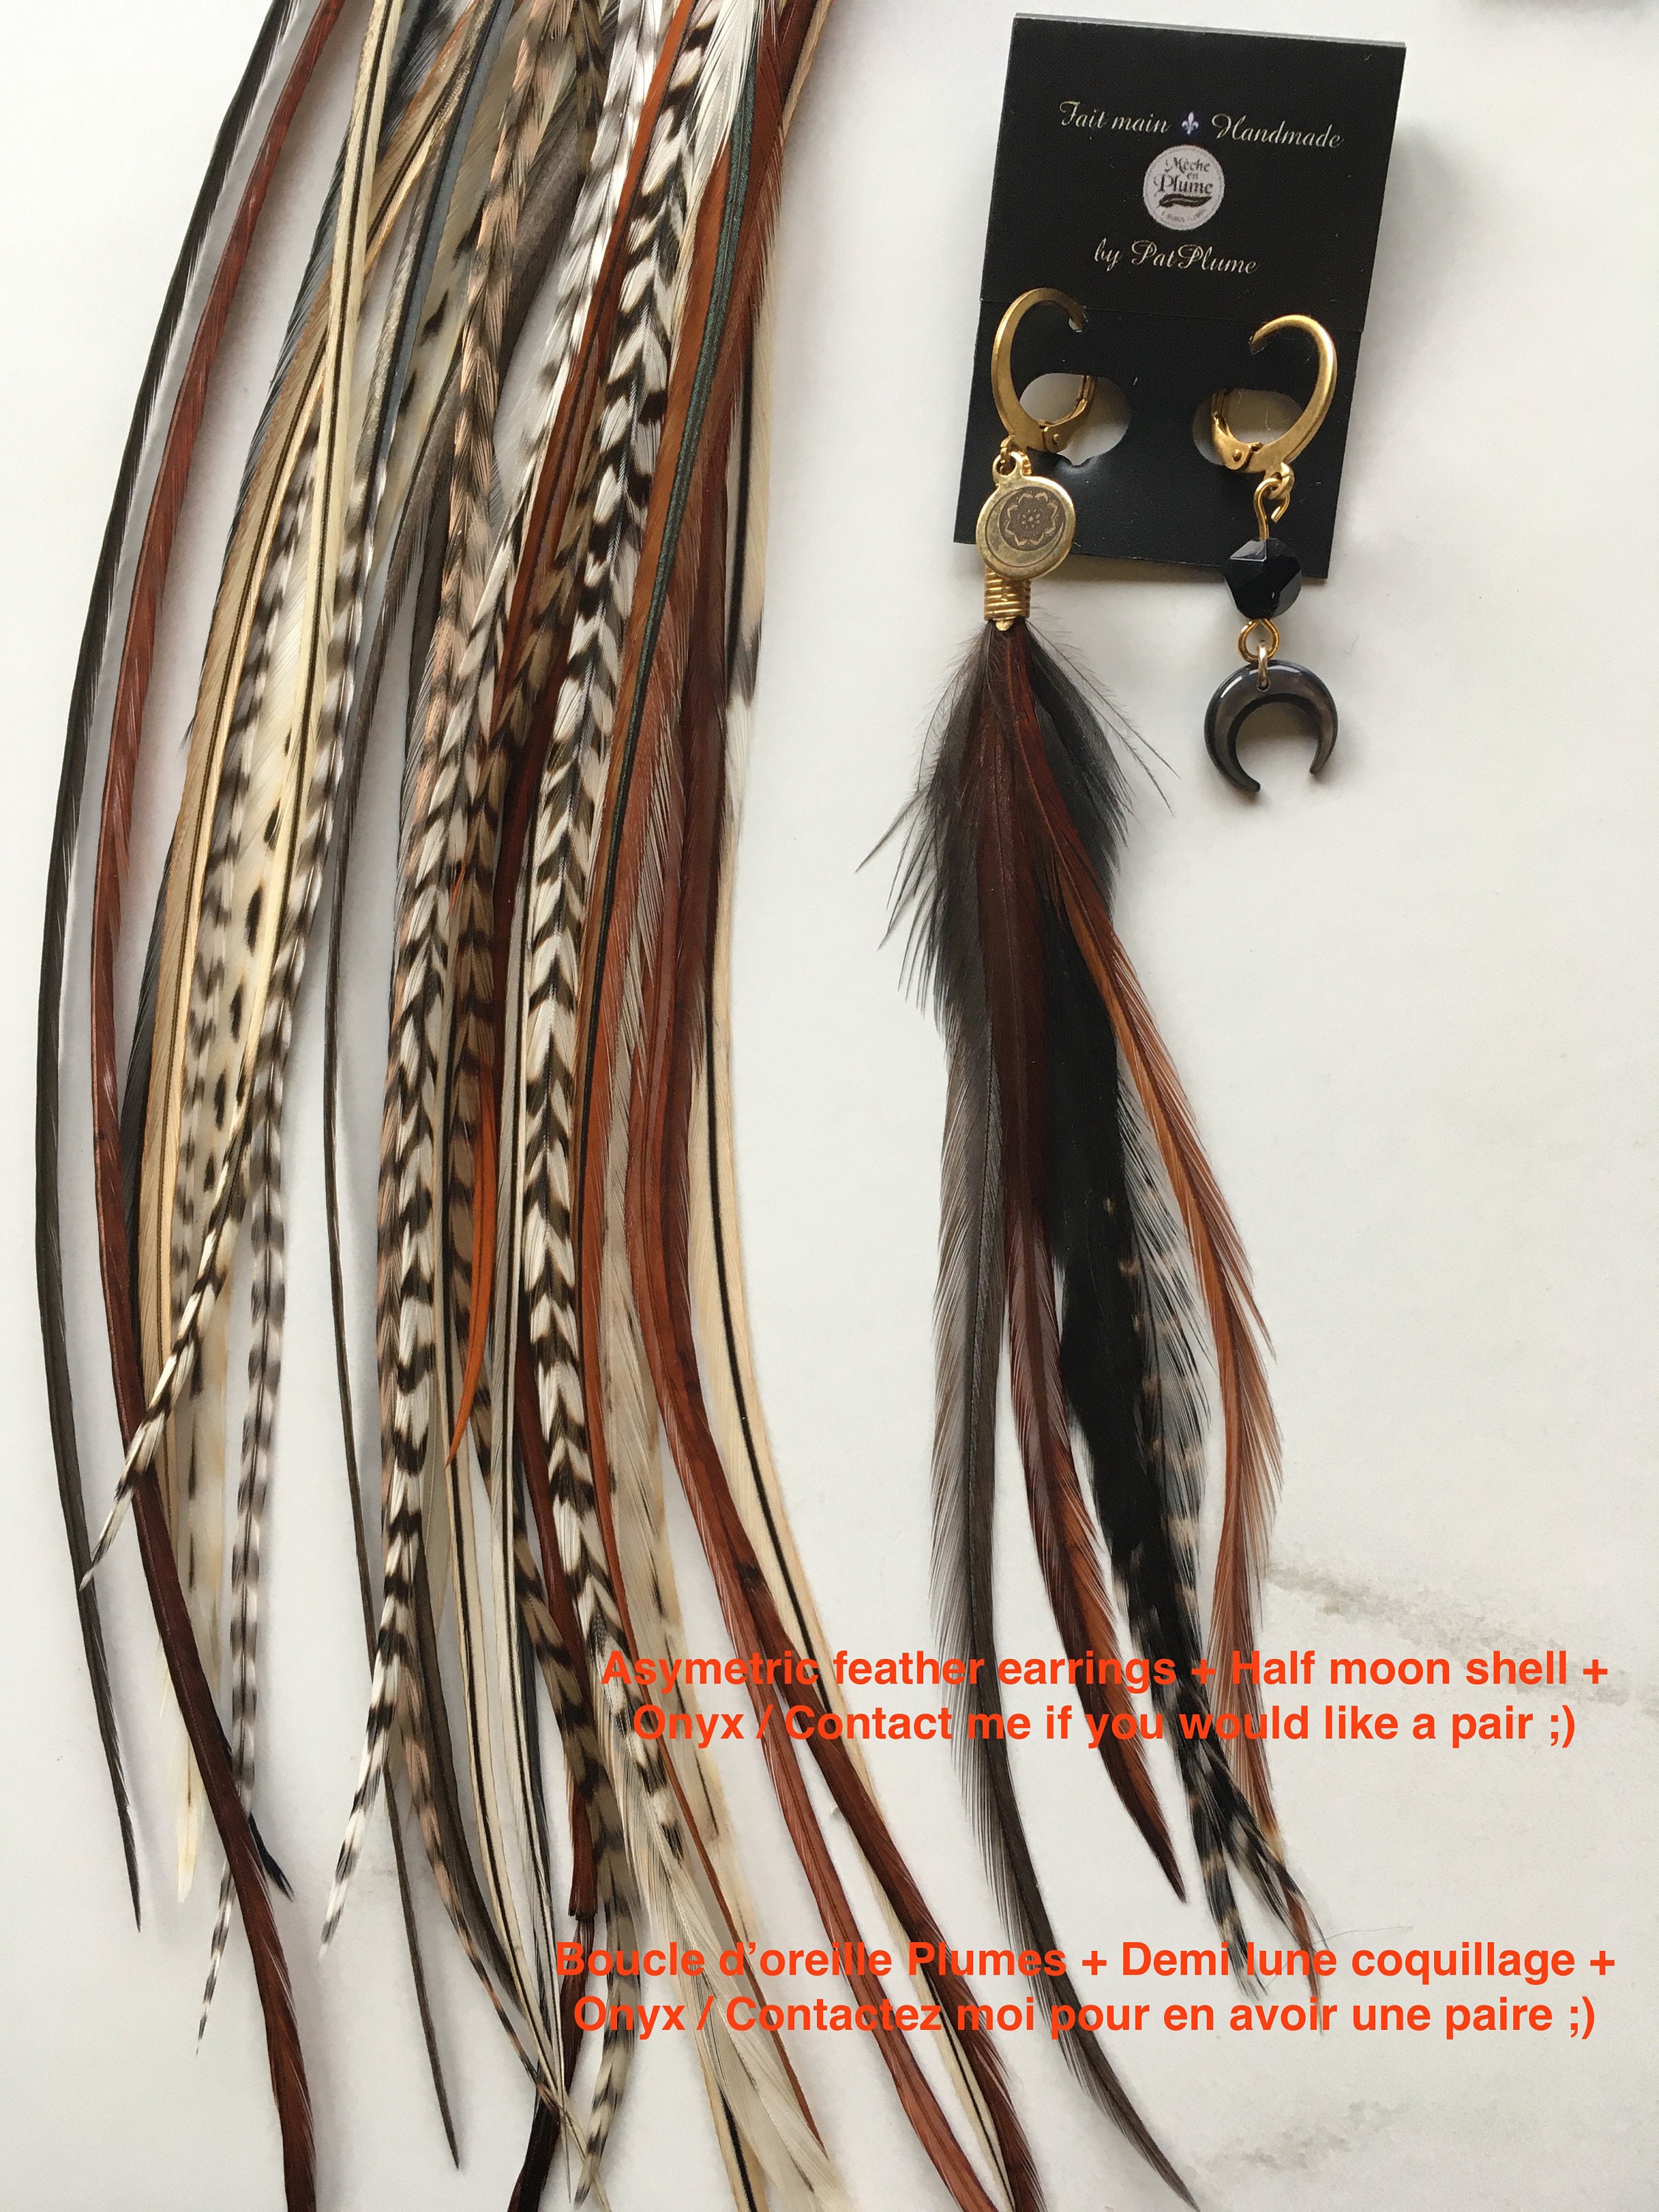 Bulk Feather Extensions / 50x Rooster Feathers 7' 12' / Bulk Feathers / All  Natural Colors / Hair Feathers / Craft Feathers 